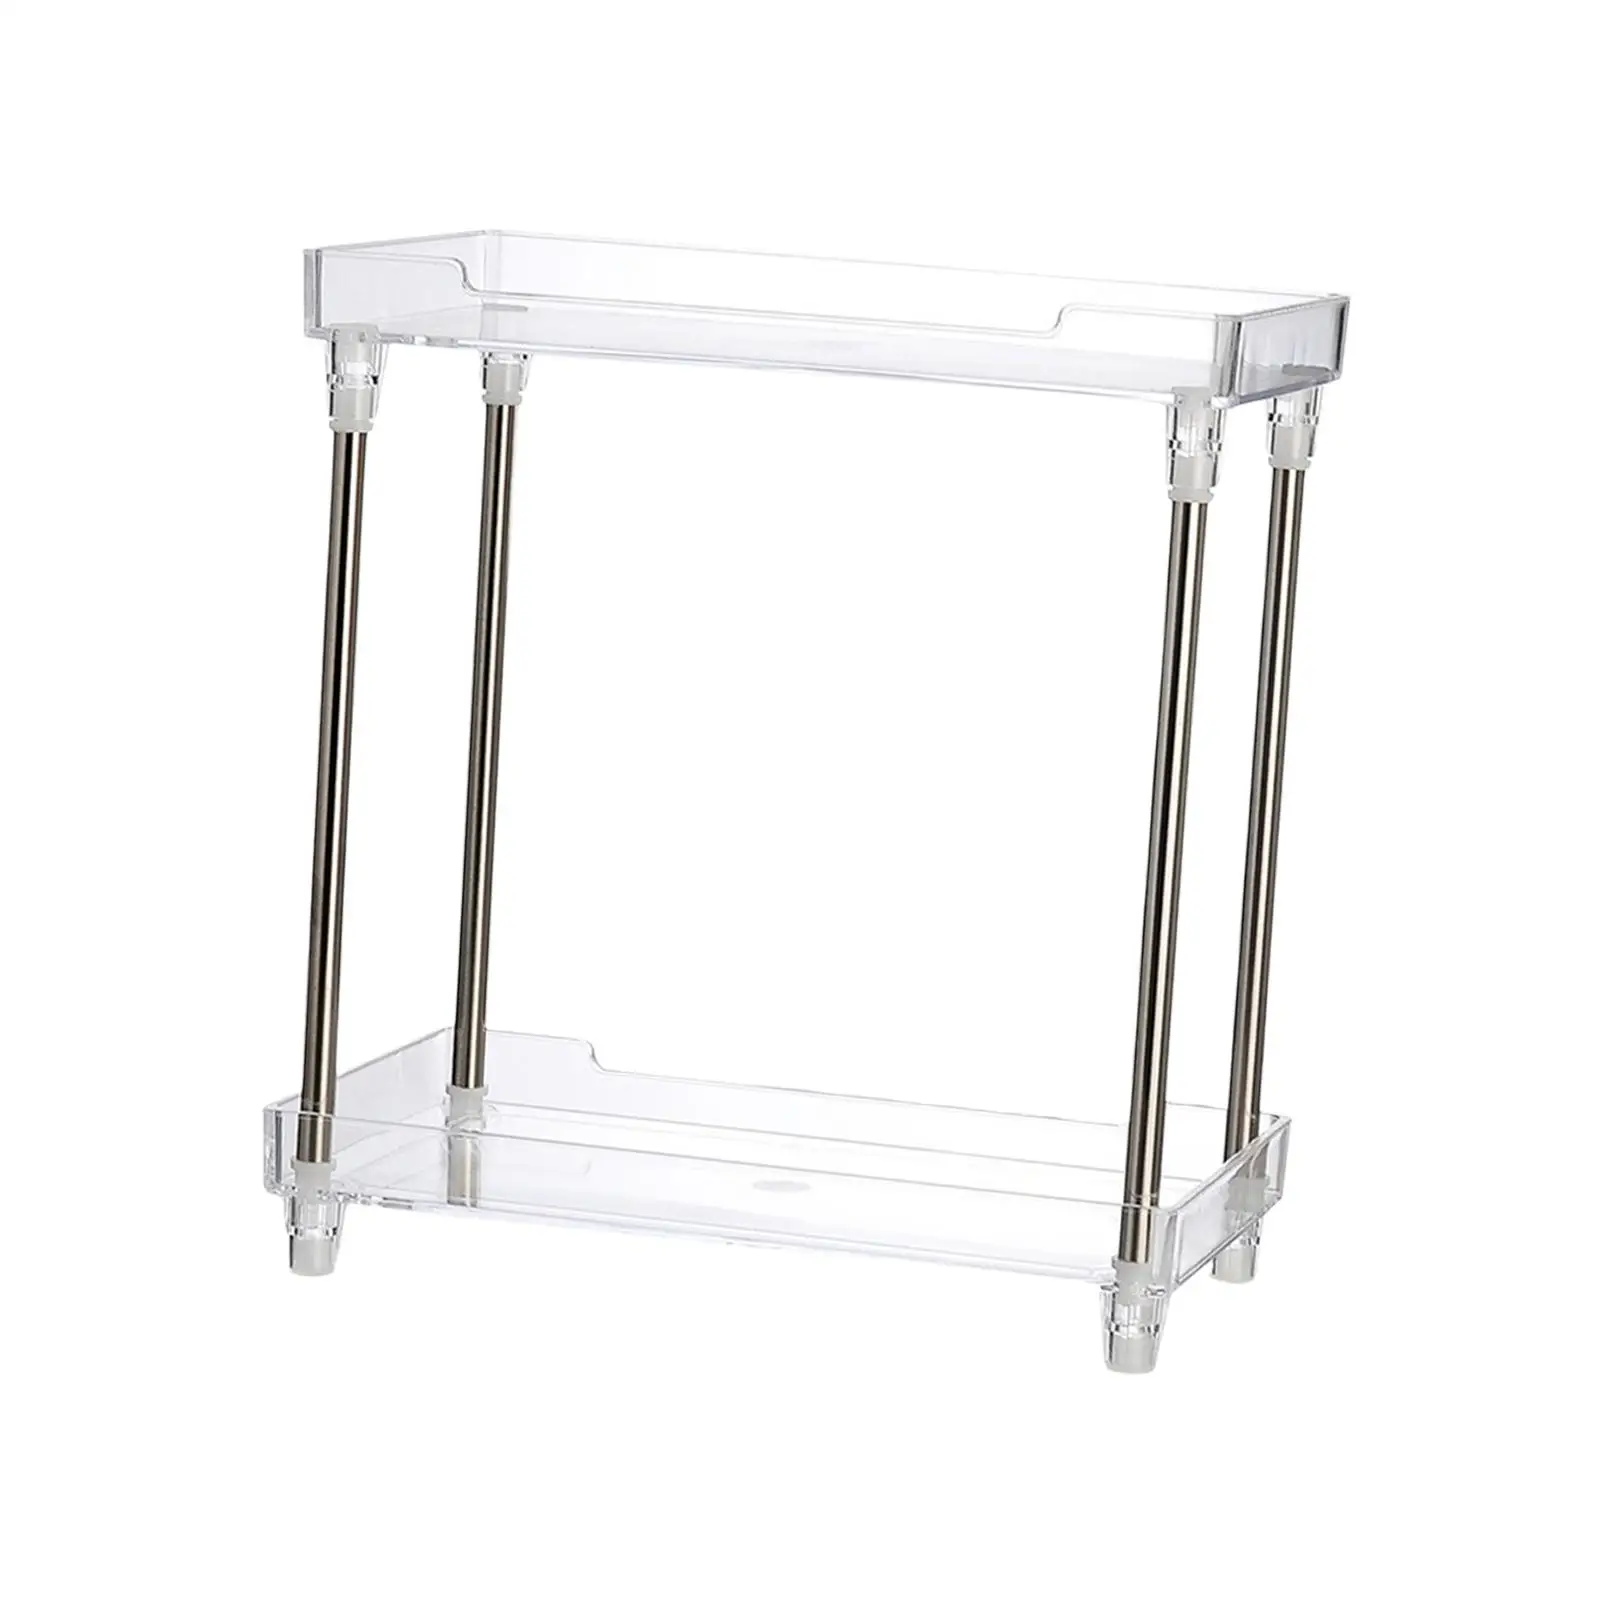 Double Layer Kitchen Rack Stable Non Slip Modern Multifunction Jewelry Storage Tray for Home Pantry Living Room Cupboard